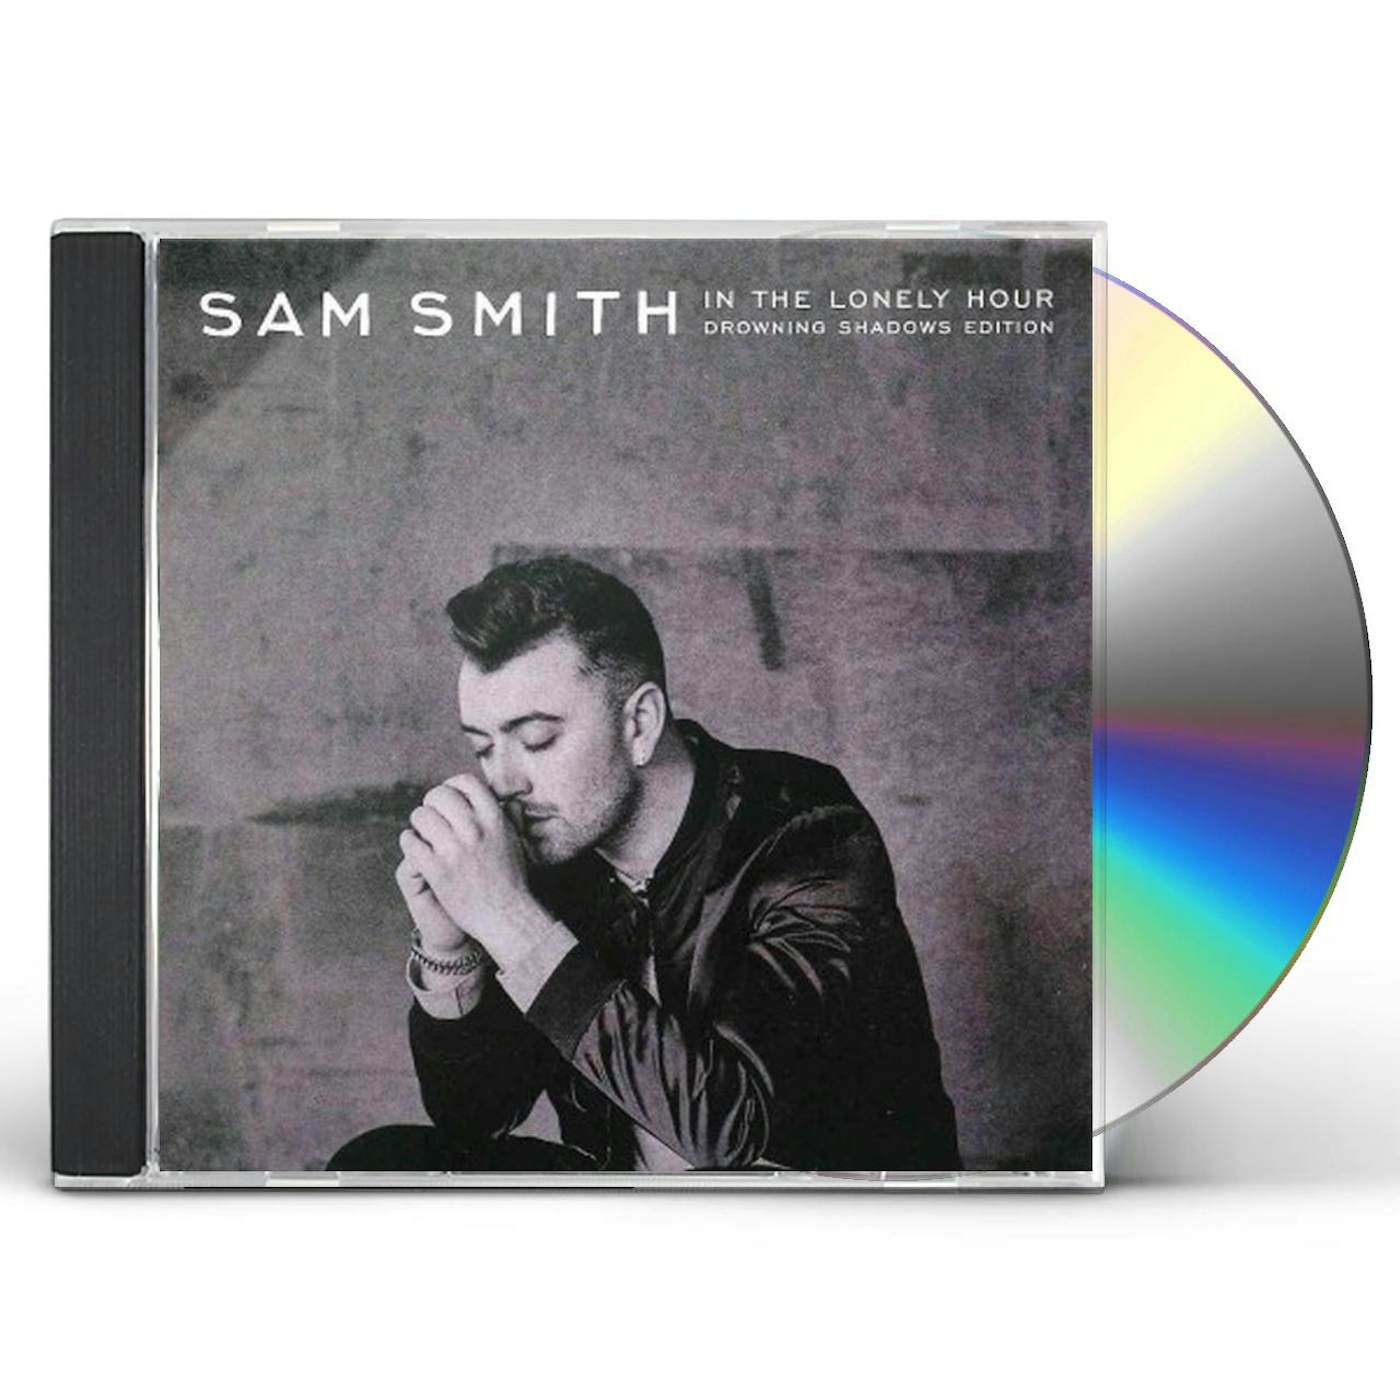 Sam Smith IN THE LONELY HOUR: DROWNING SHADOWS EDITION CD